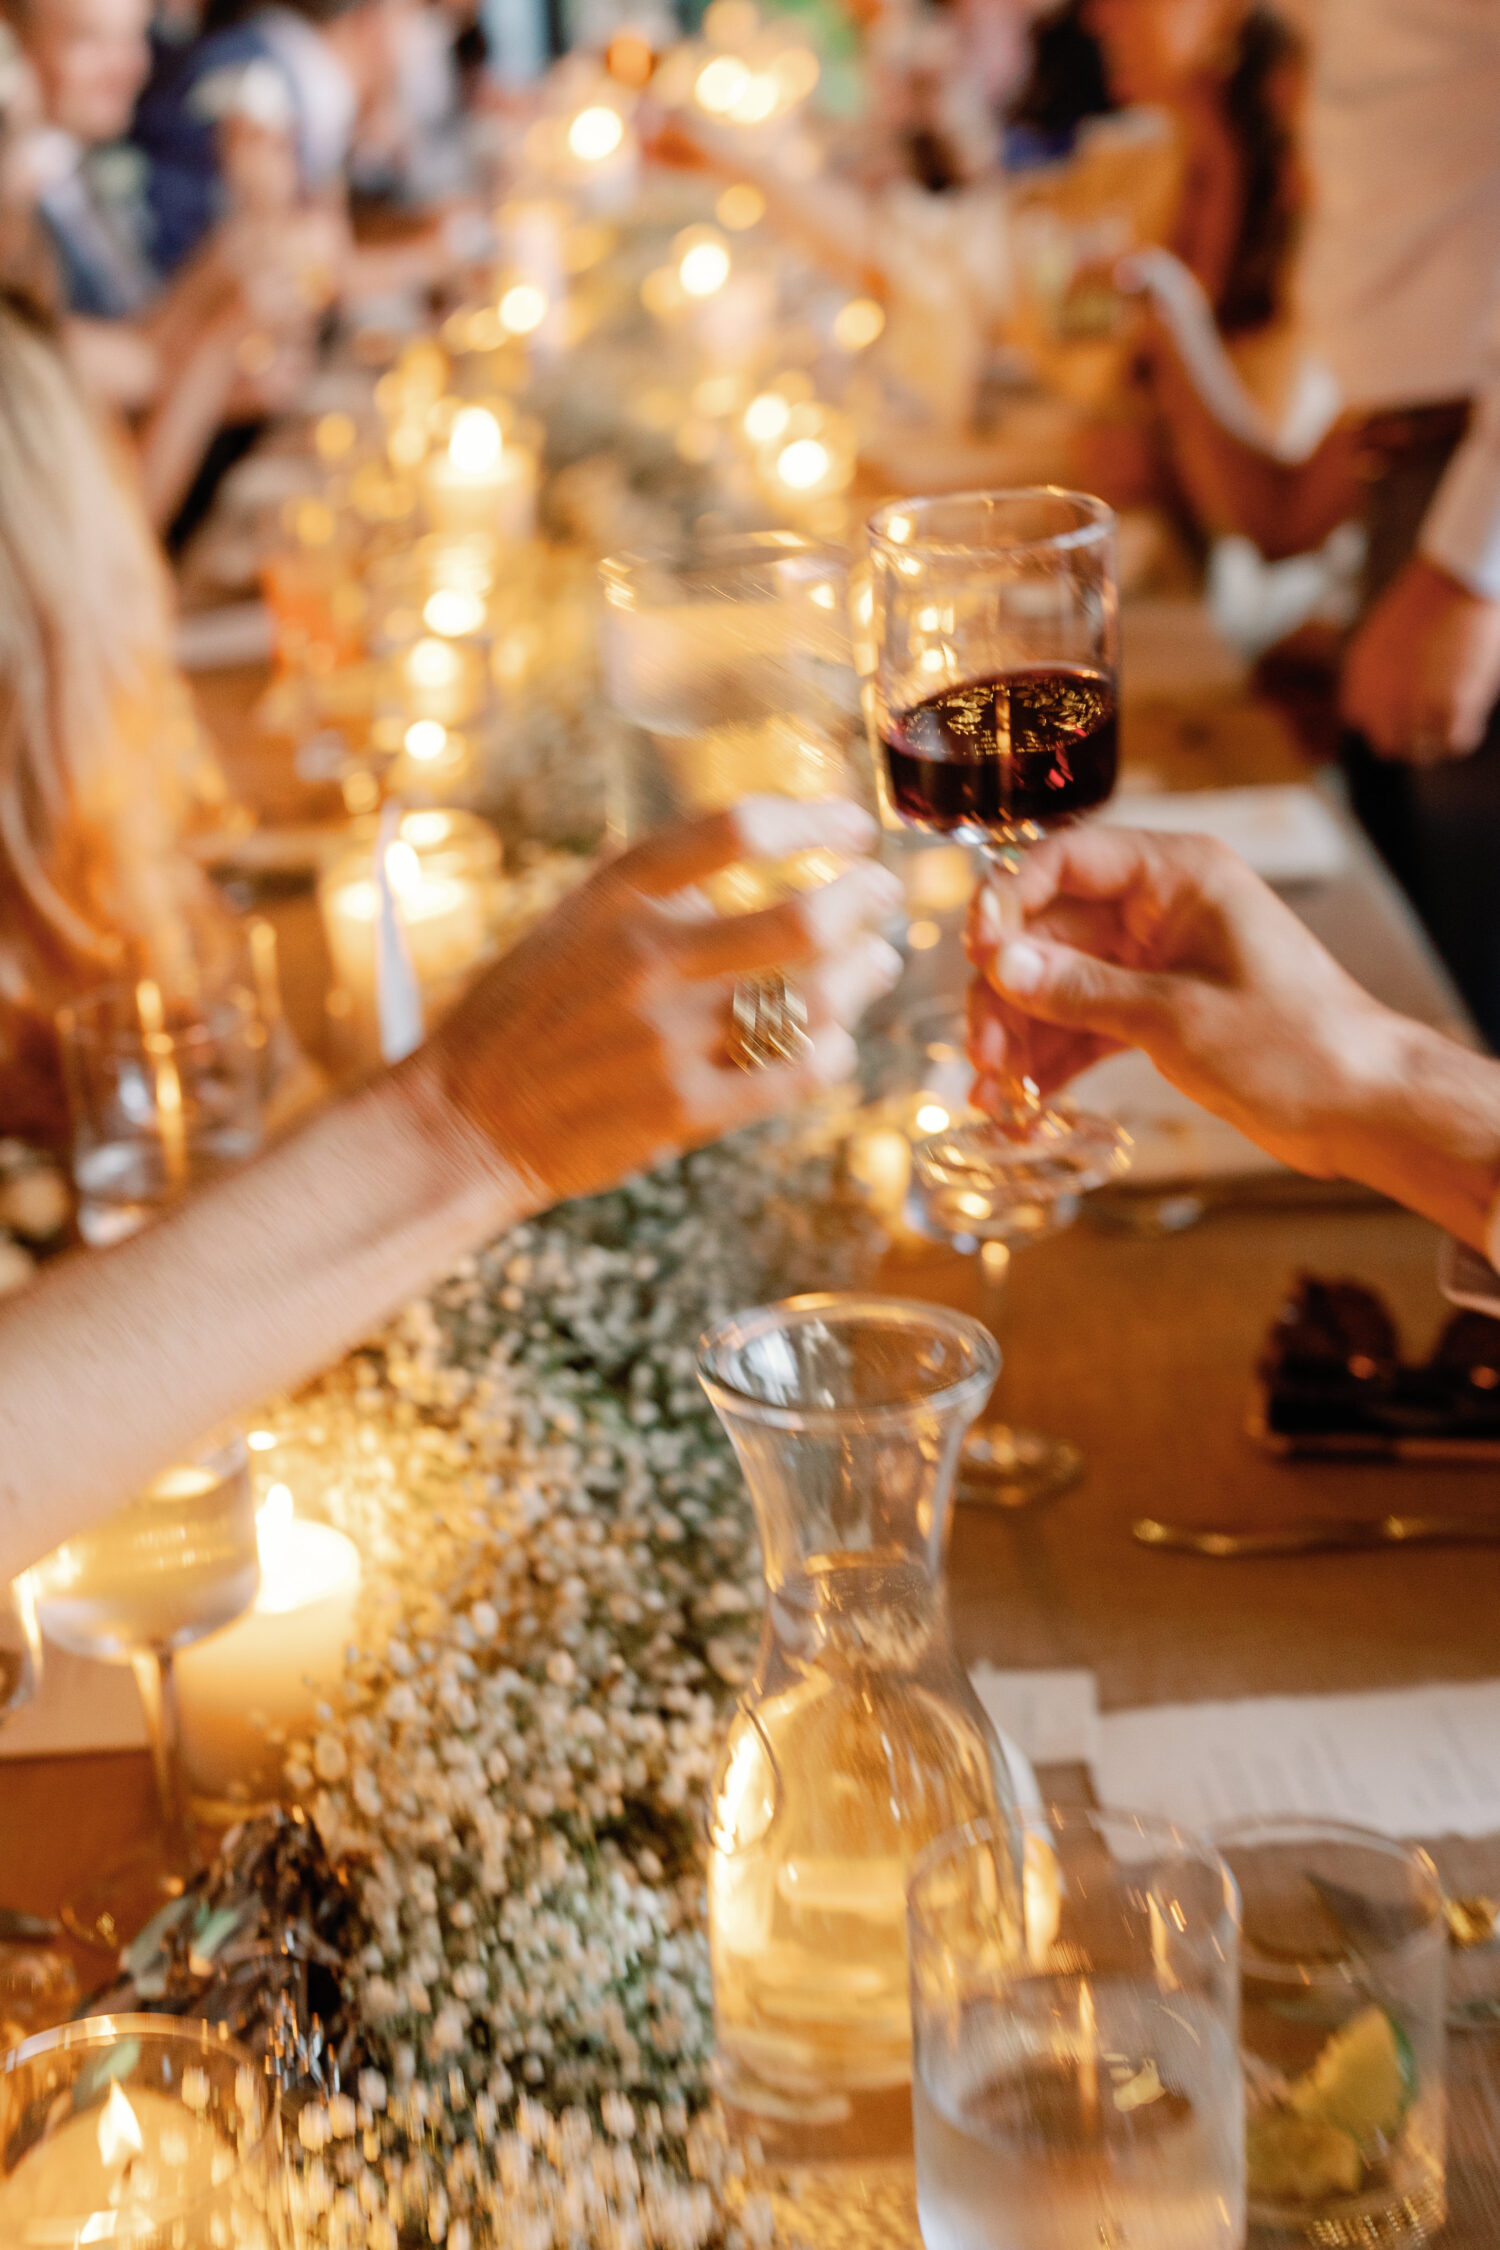 Image of a candlelit reception table with glasses clinking to cheers in the center, slightly blurred with the feeling of motion